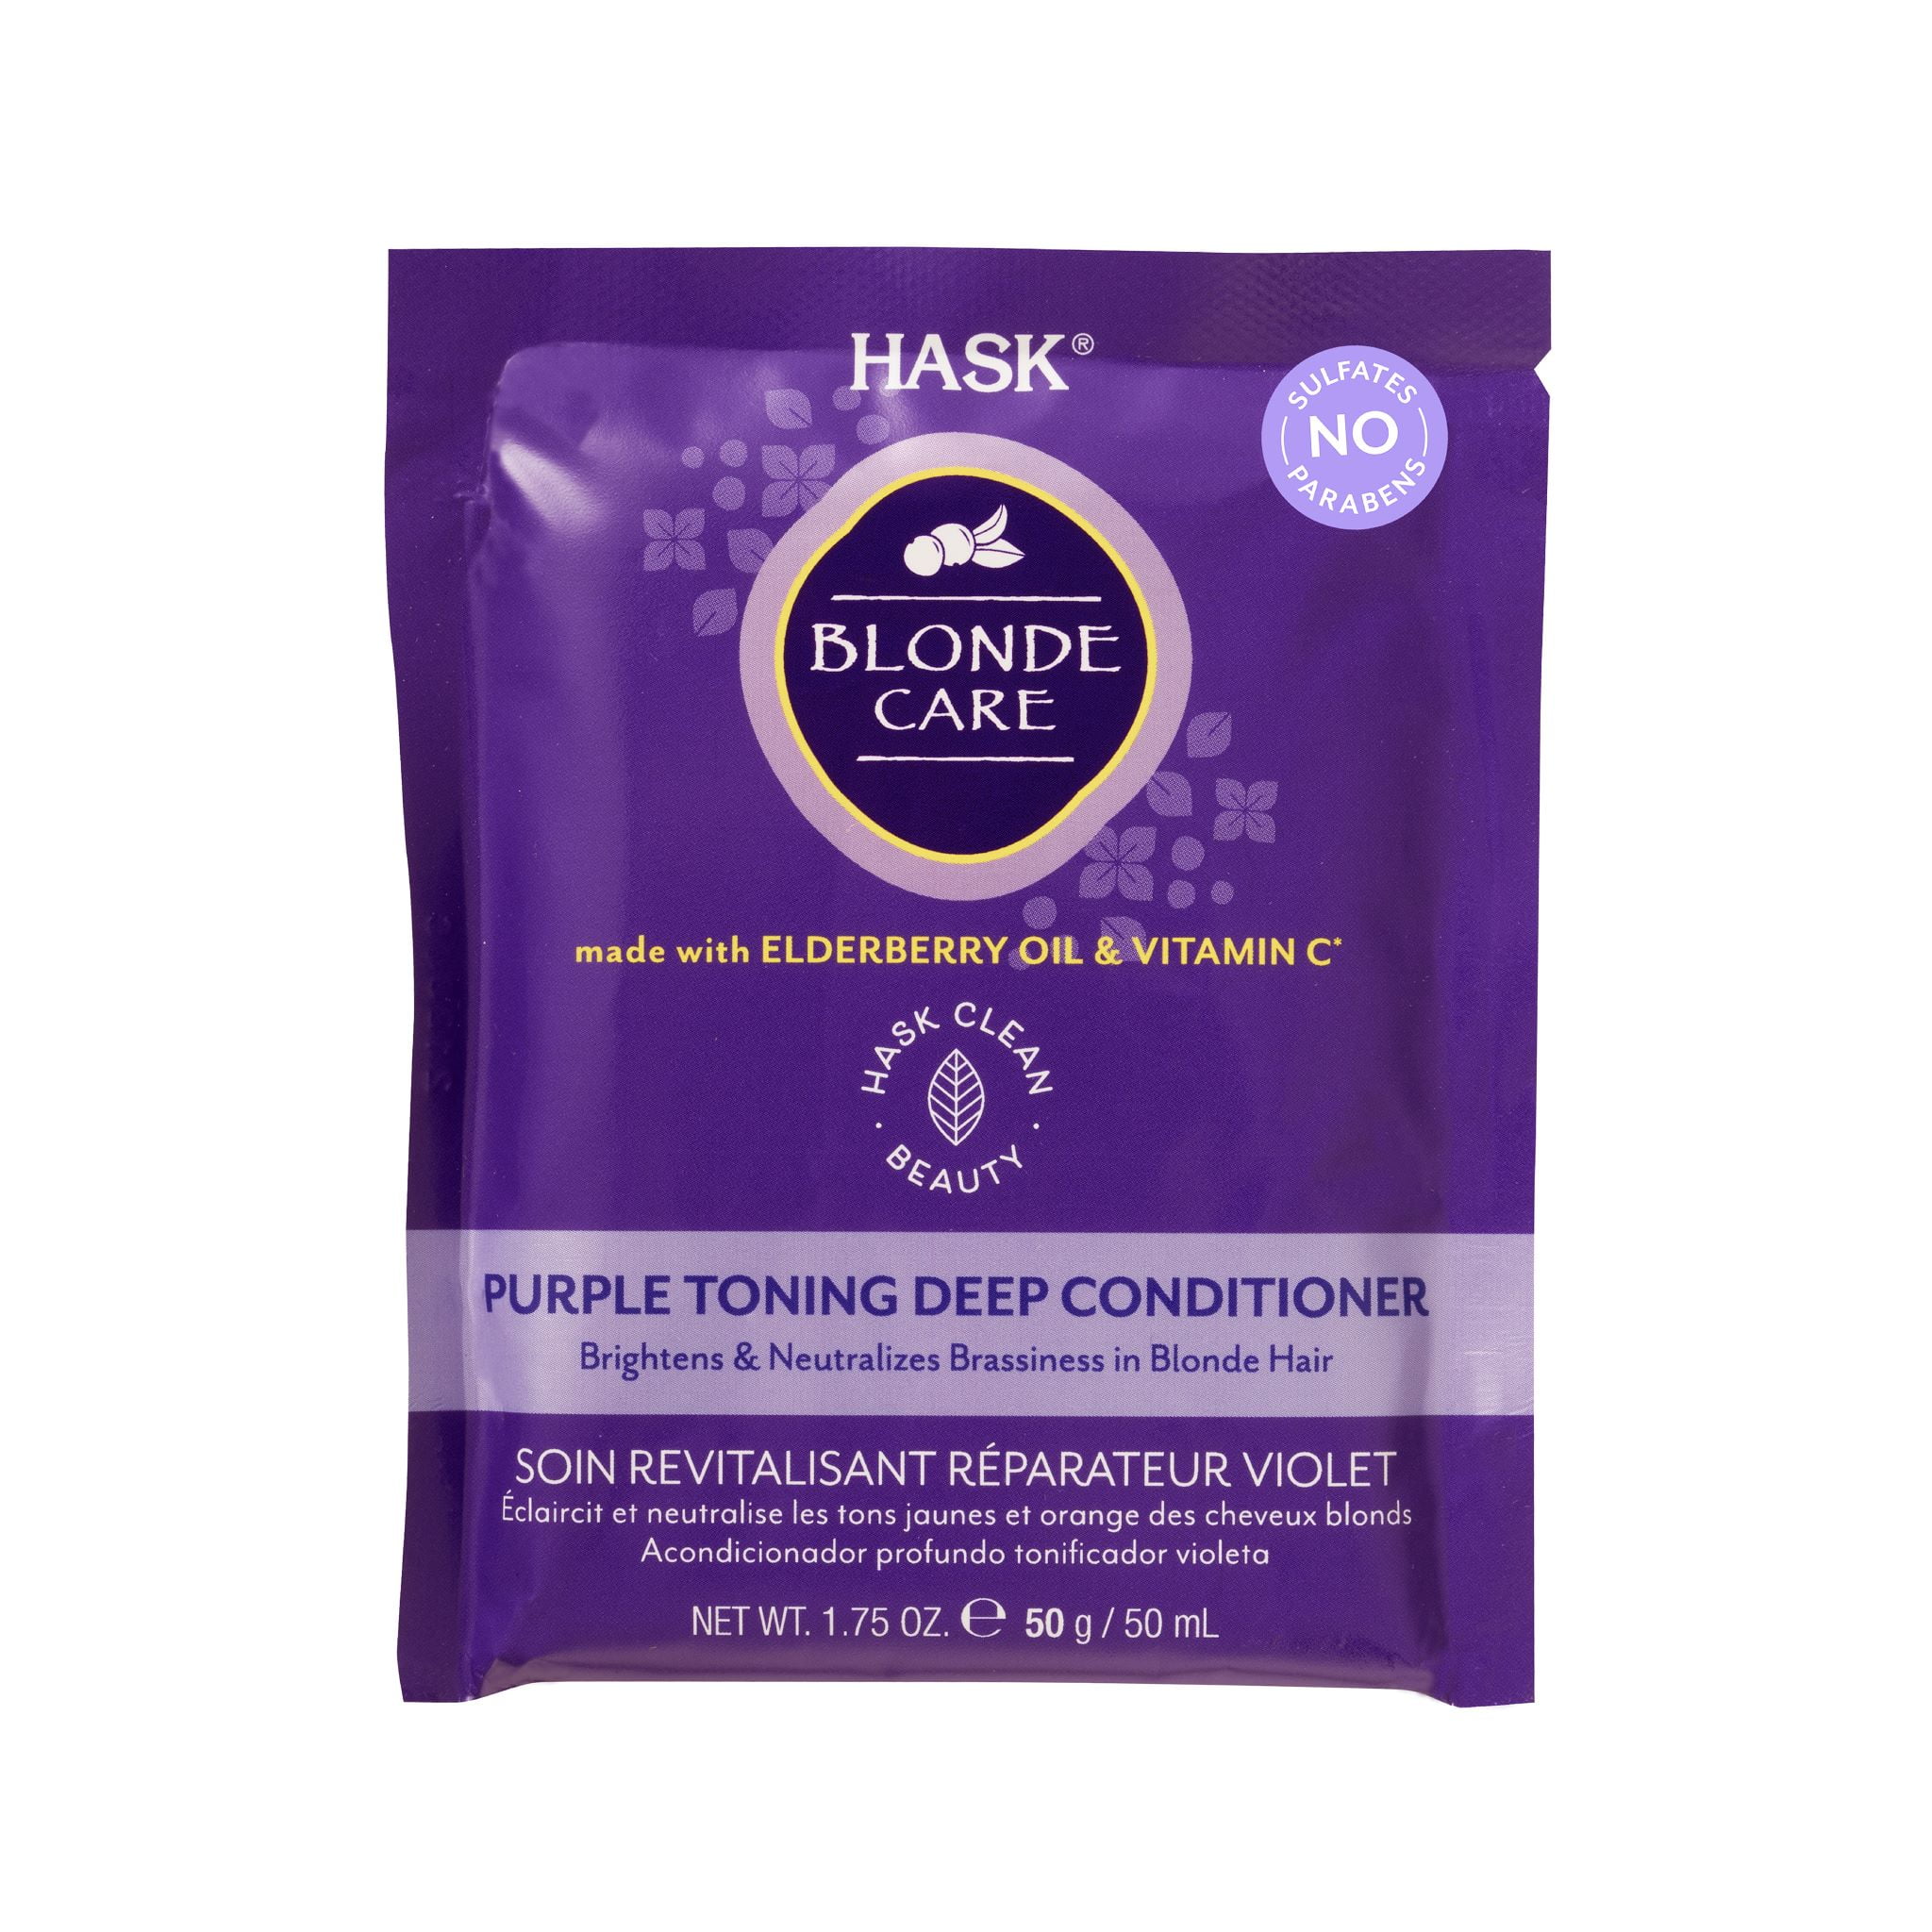 Hask Blonde Care Color Protection Sulfate-Free Purple Toning Deep Conditioner with Elderberry & Vitamin C, 1.75 oz, Travel Size